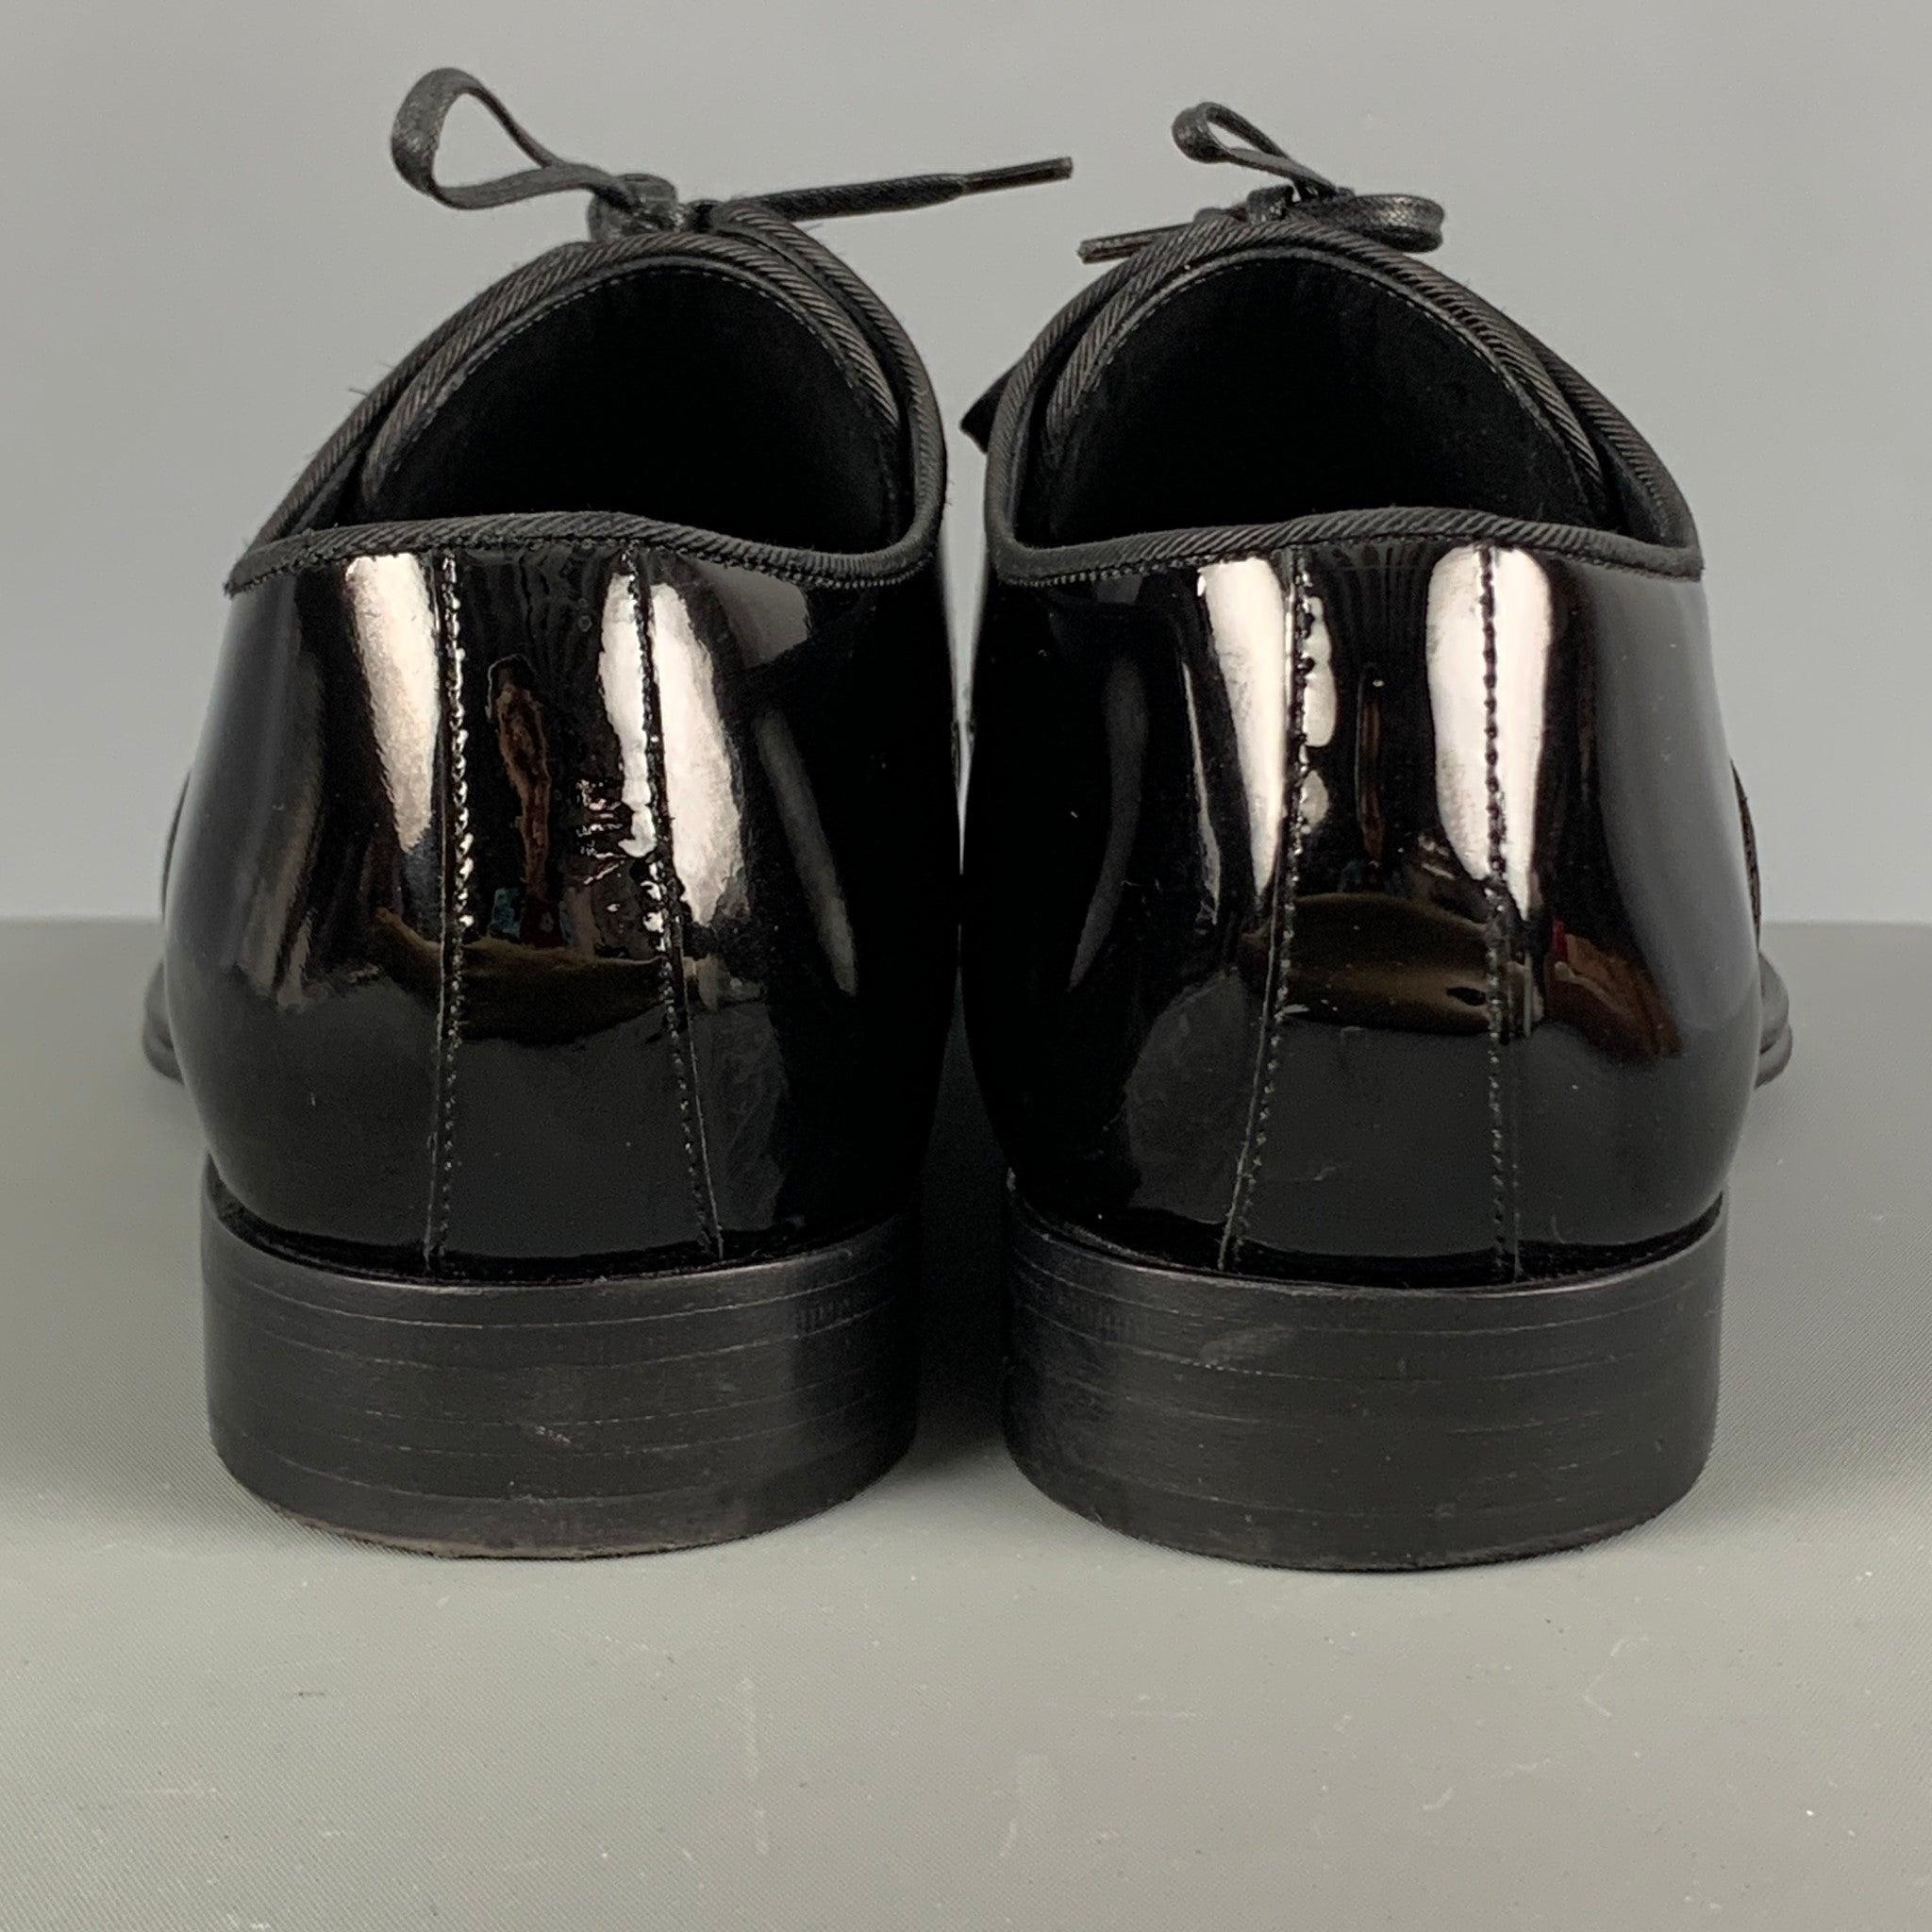 DOLCE & GABBANA Size 7.5 Black Lace Up Shoes In Excellent Condition For Sale In San Francisco, CA